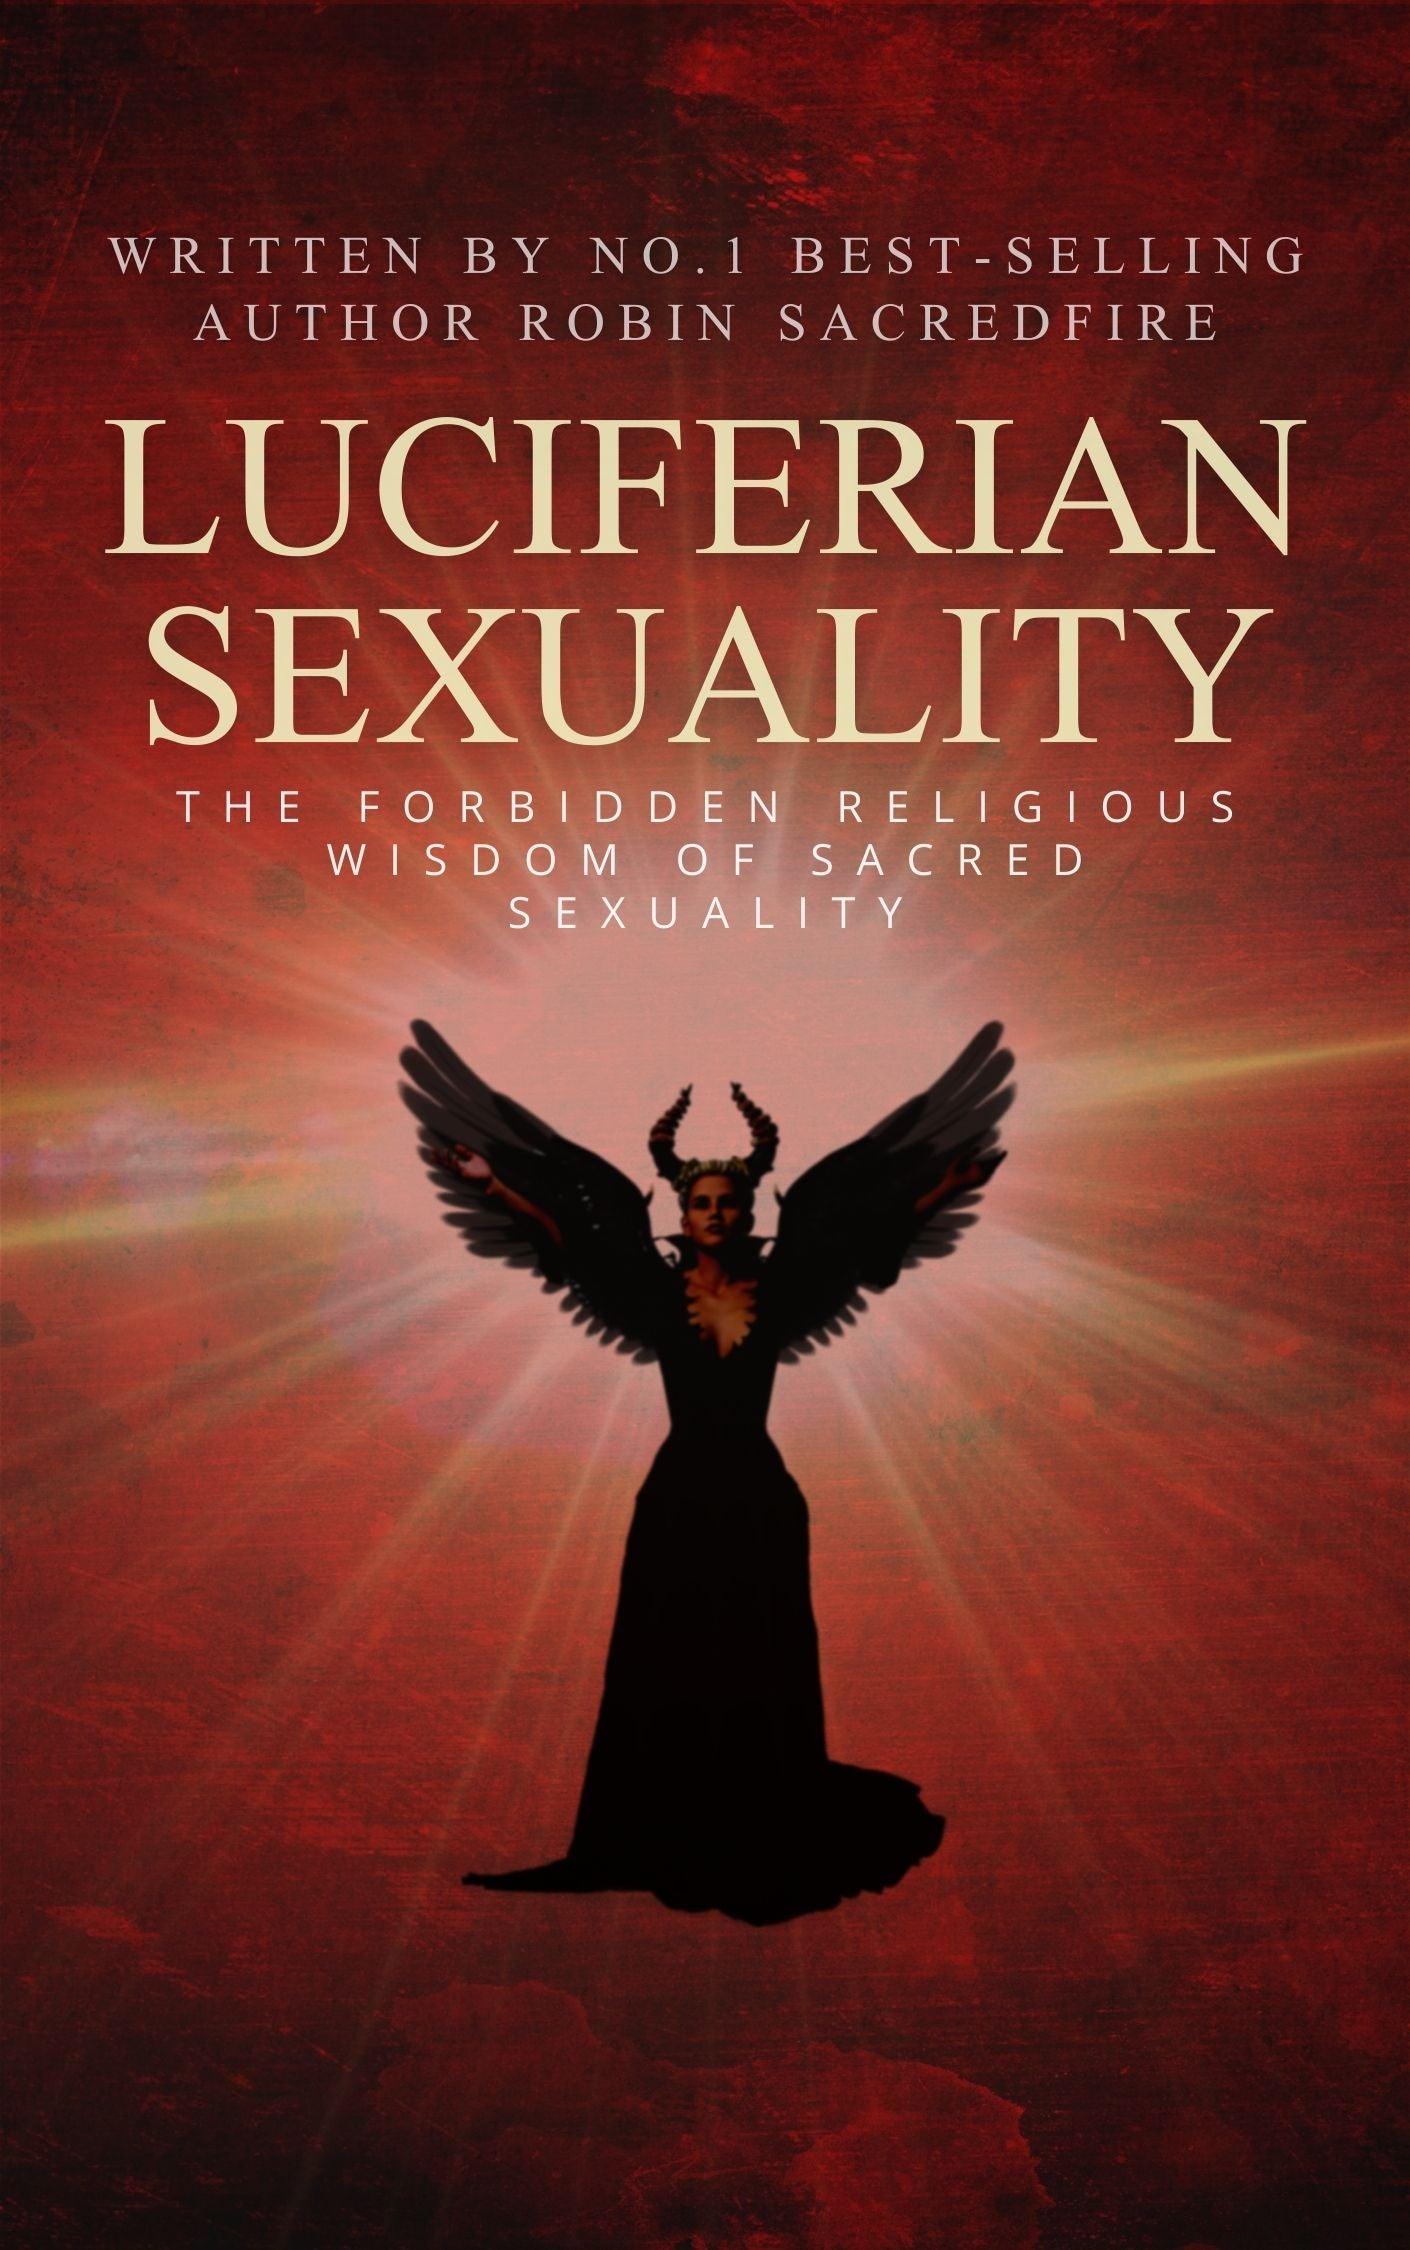 Luciferian Sexuality - 22 Lions